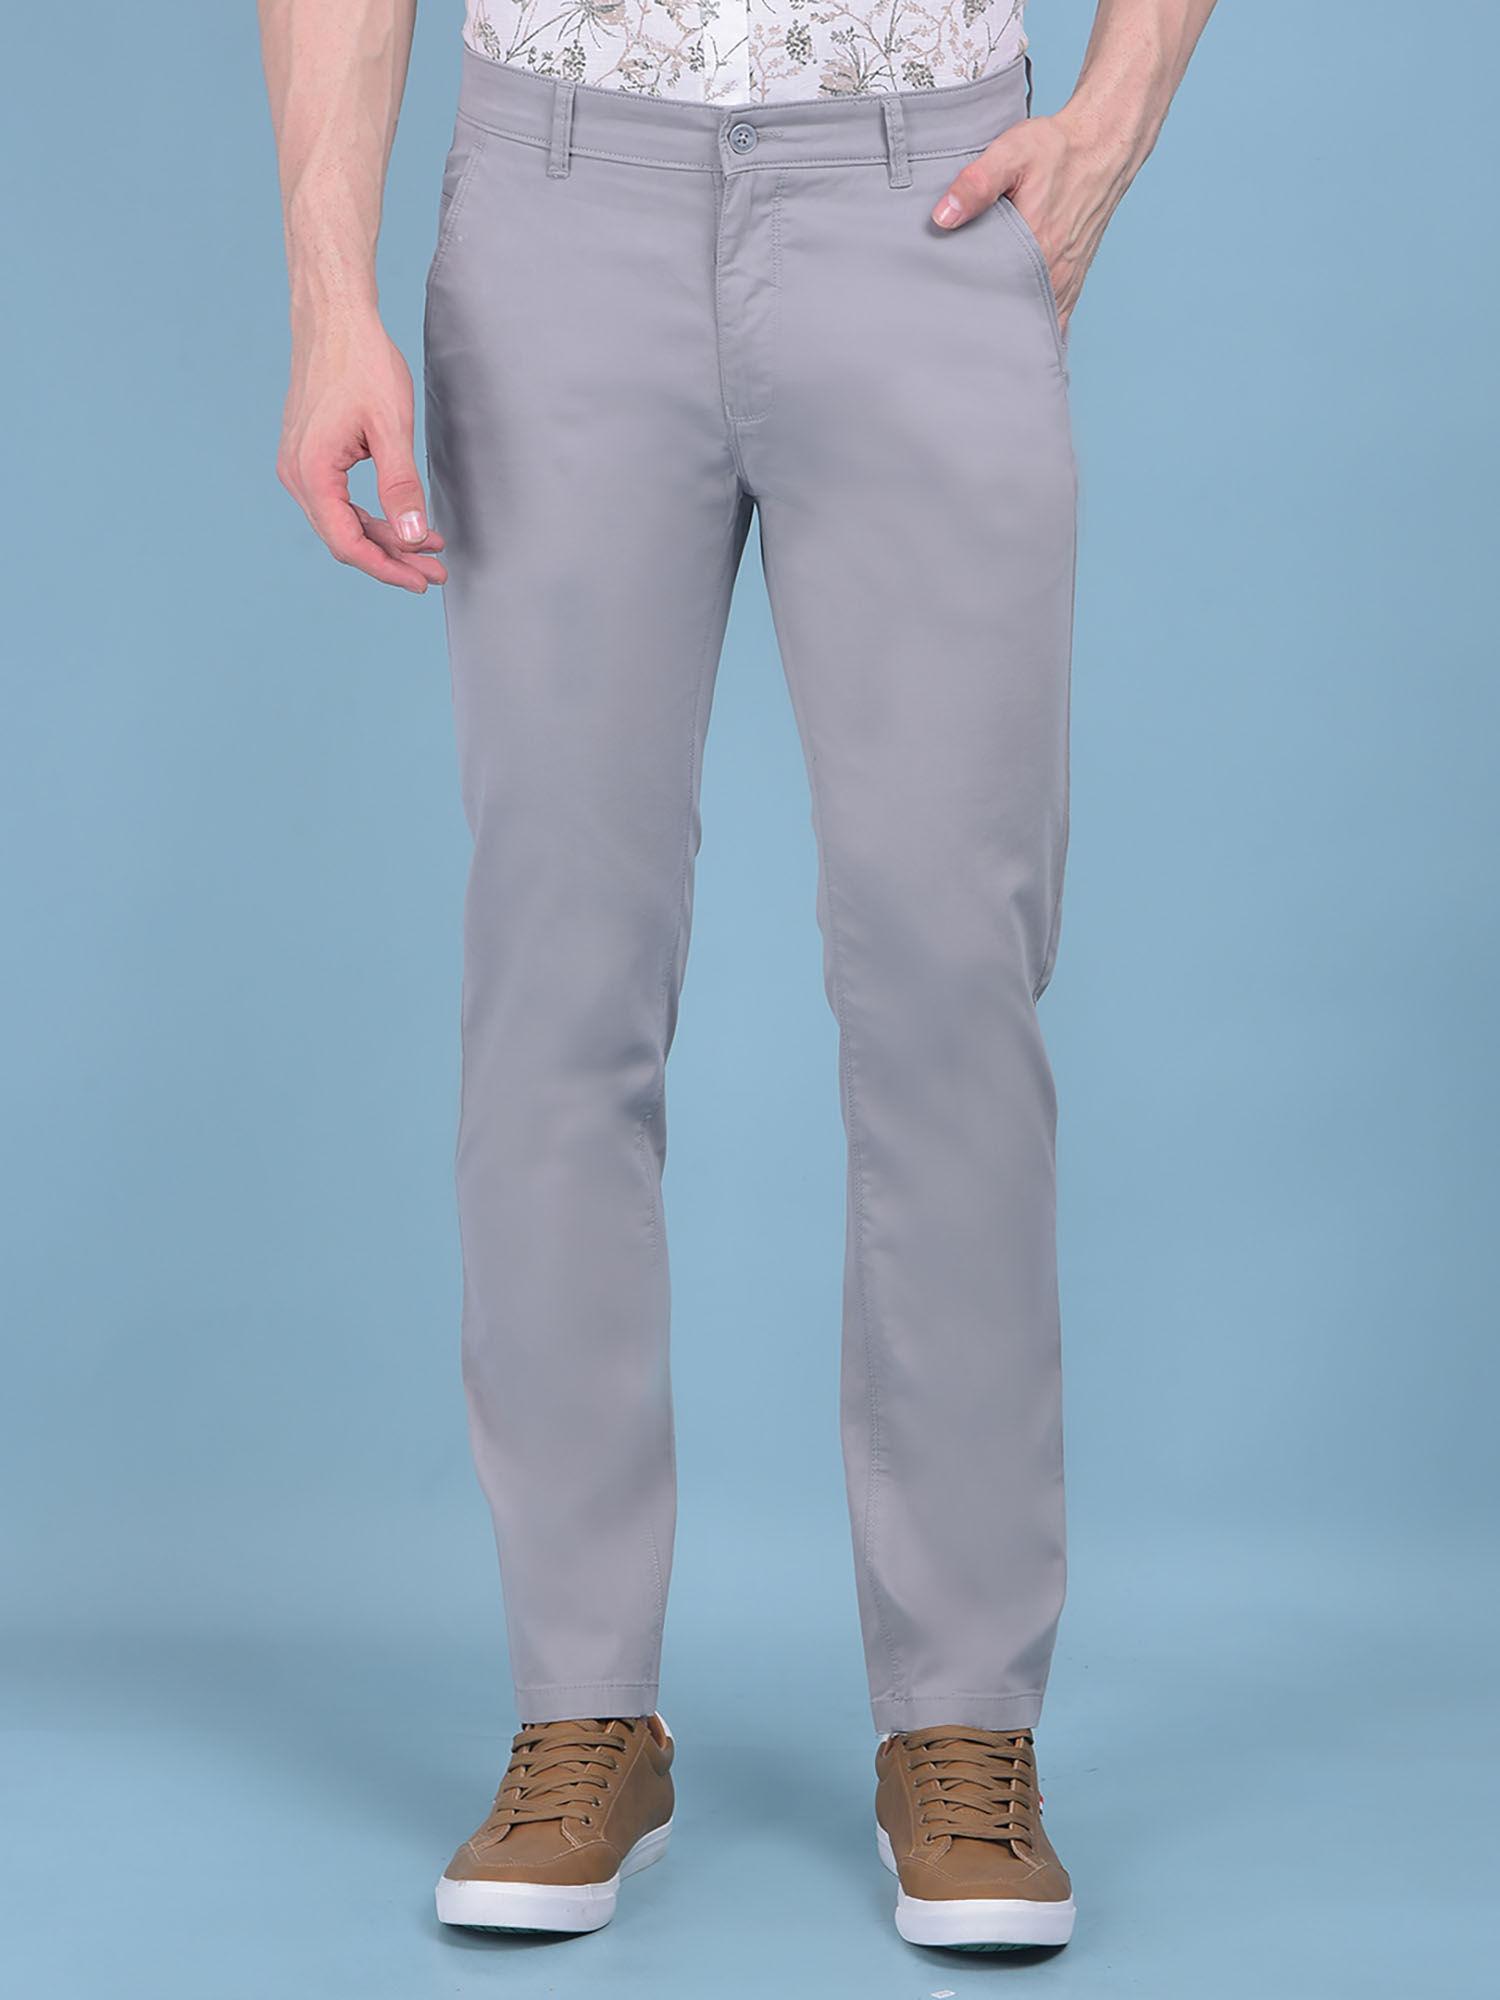 mens-grey-stretchable-trousers